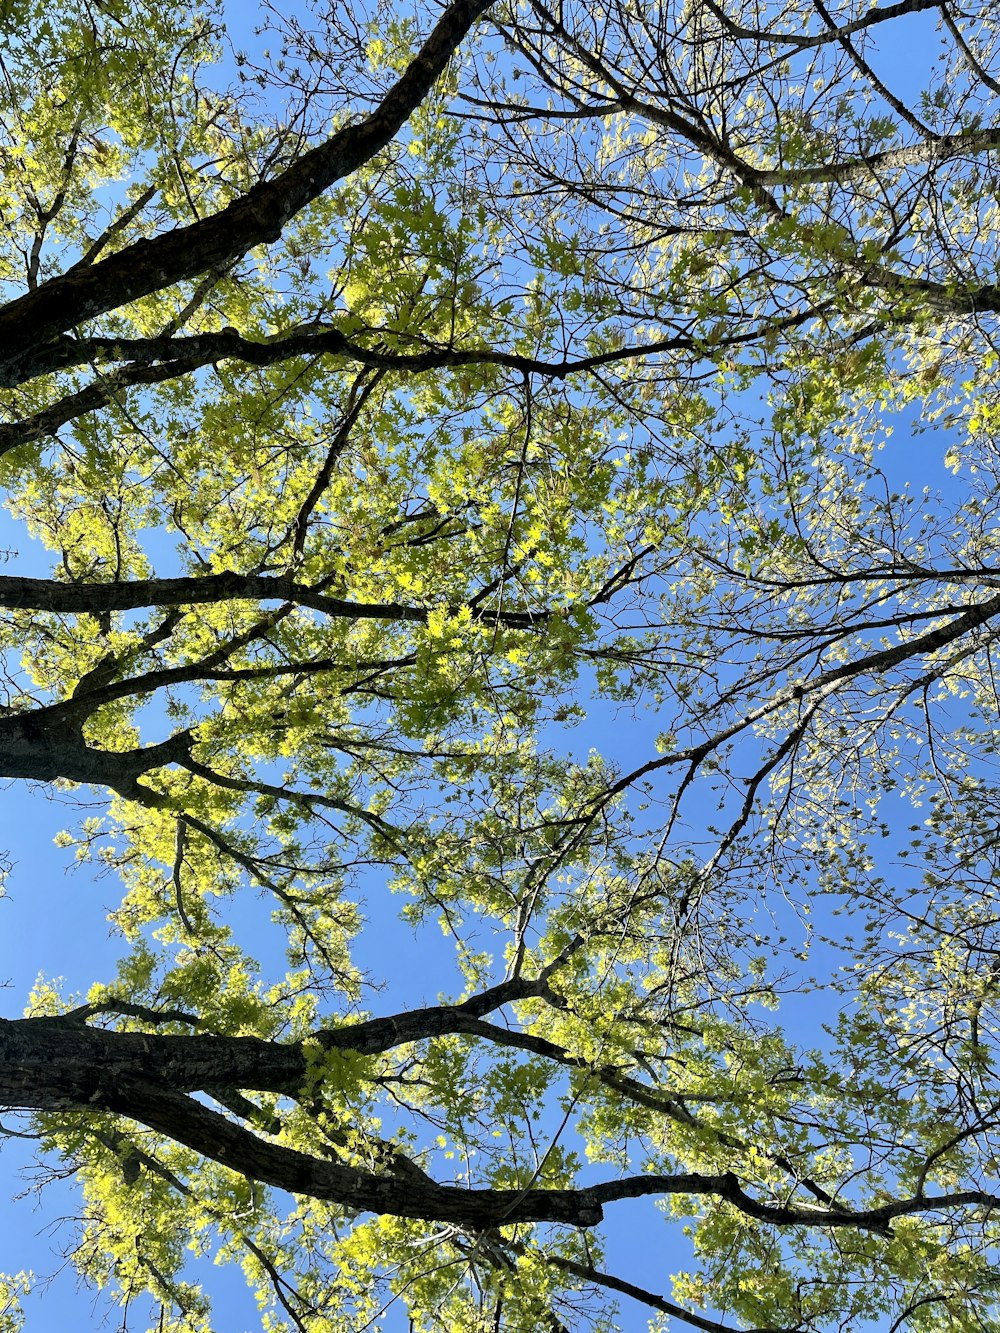 looking up at the branches of a tree